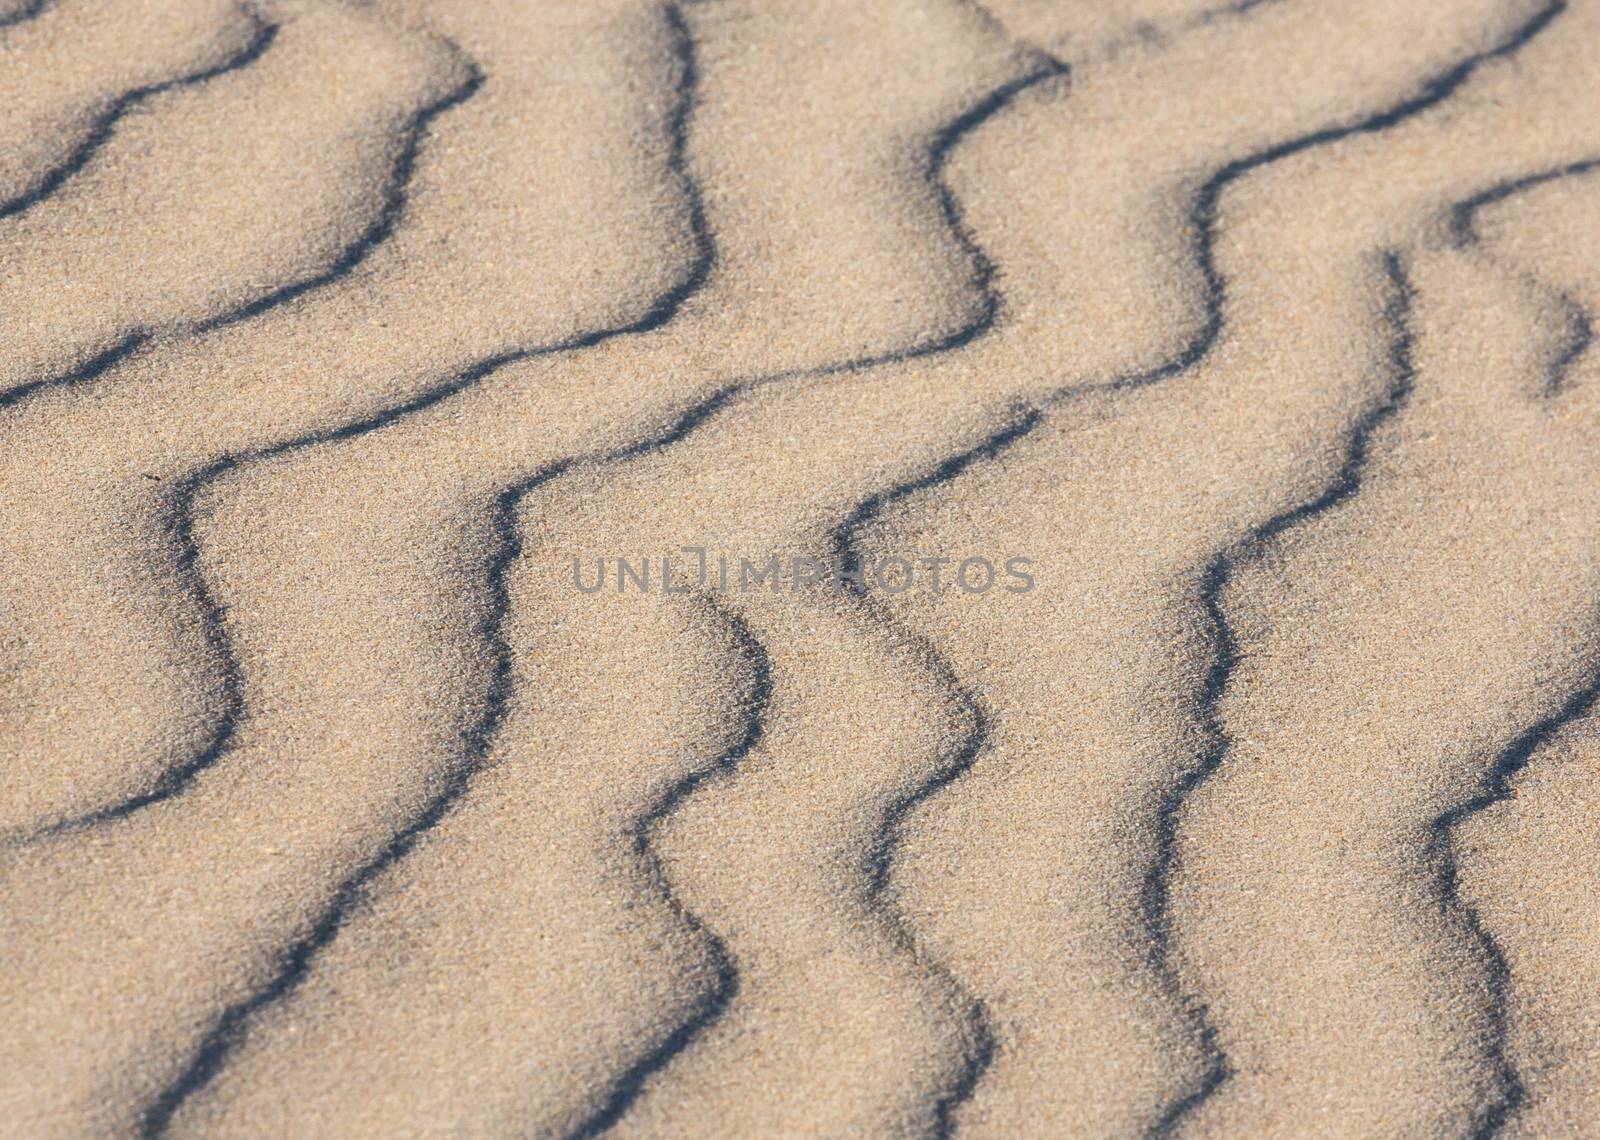 Wavy lines making a pattern on a sand dune